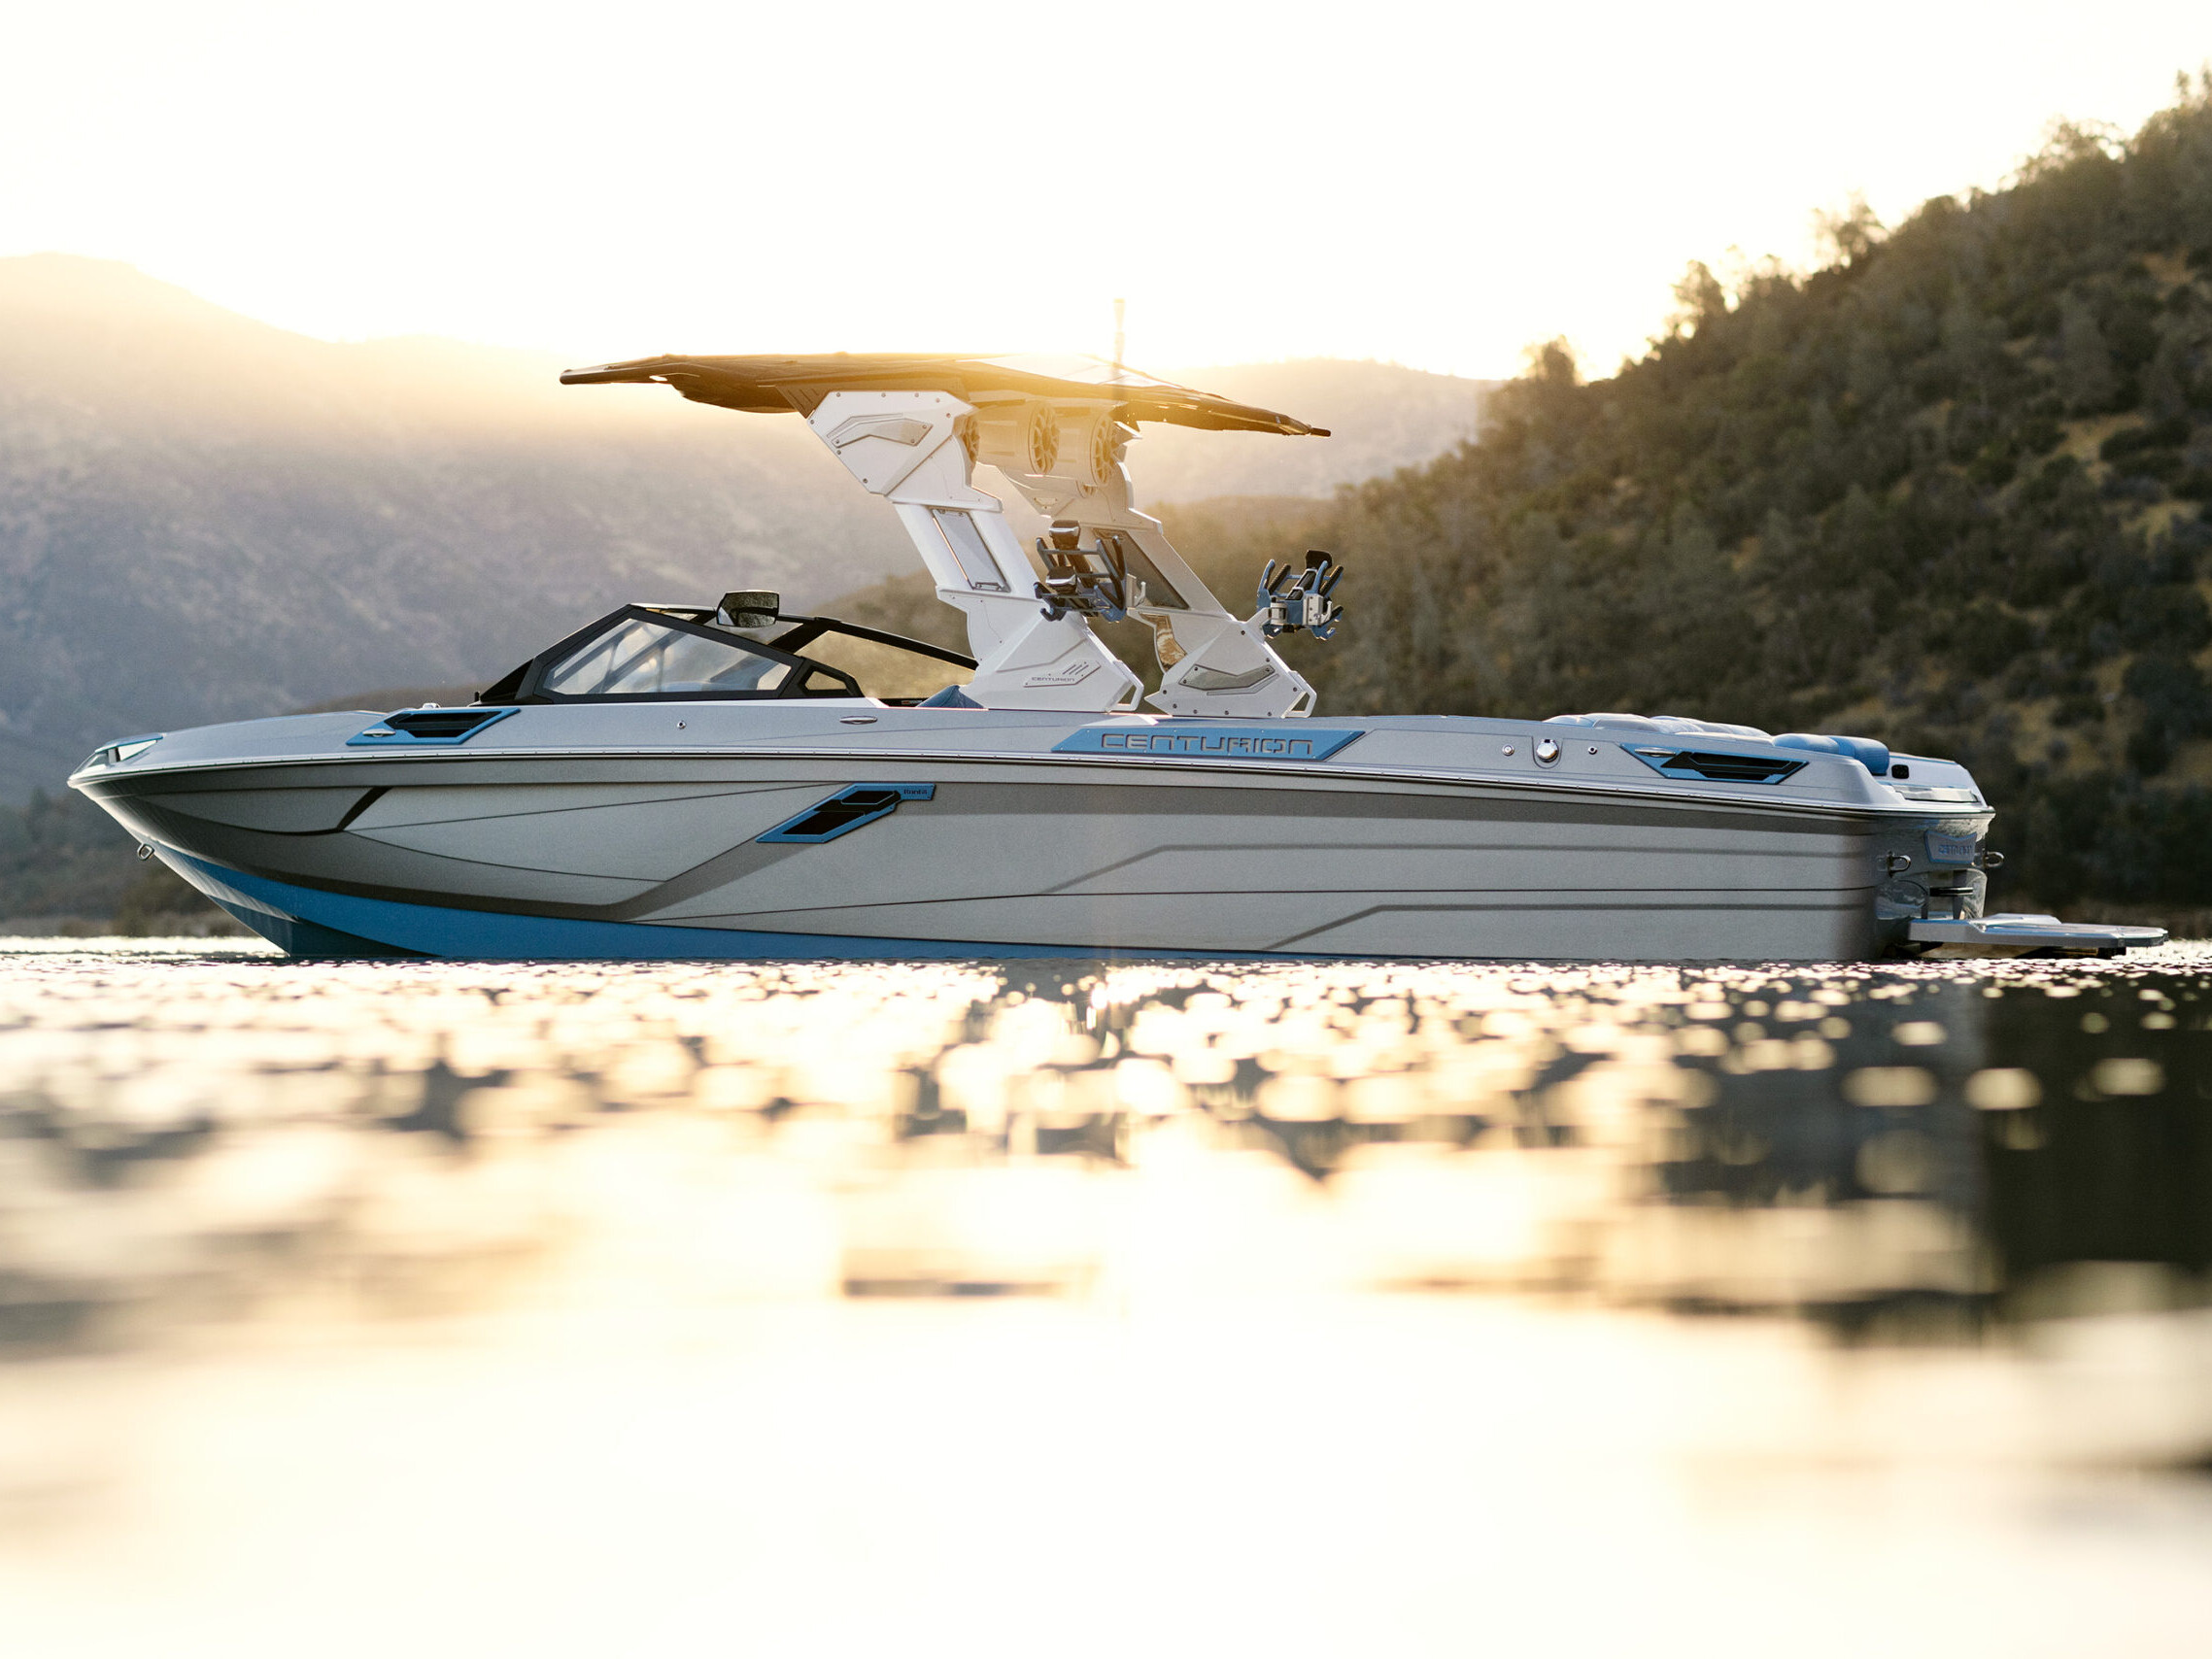 The Centurion Ri Series, a boat, gracefully navigates the water with the majestic mountains as its backdrop.